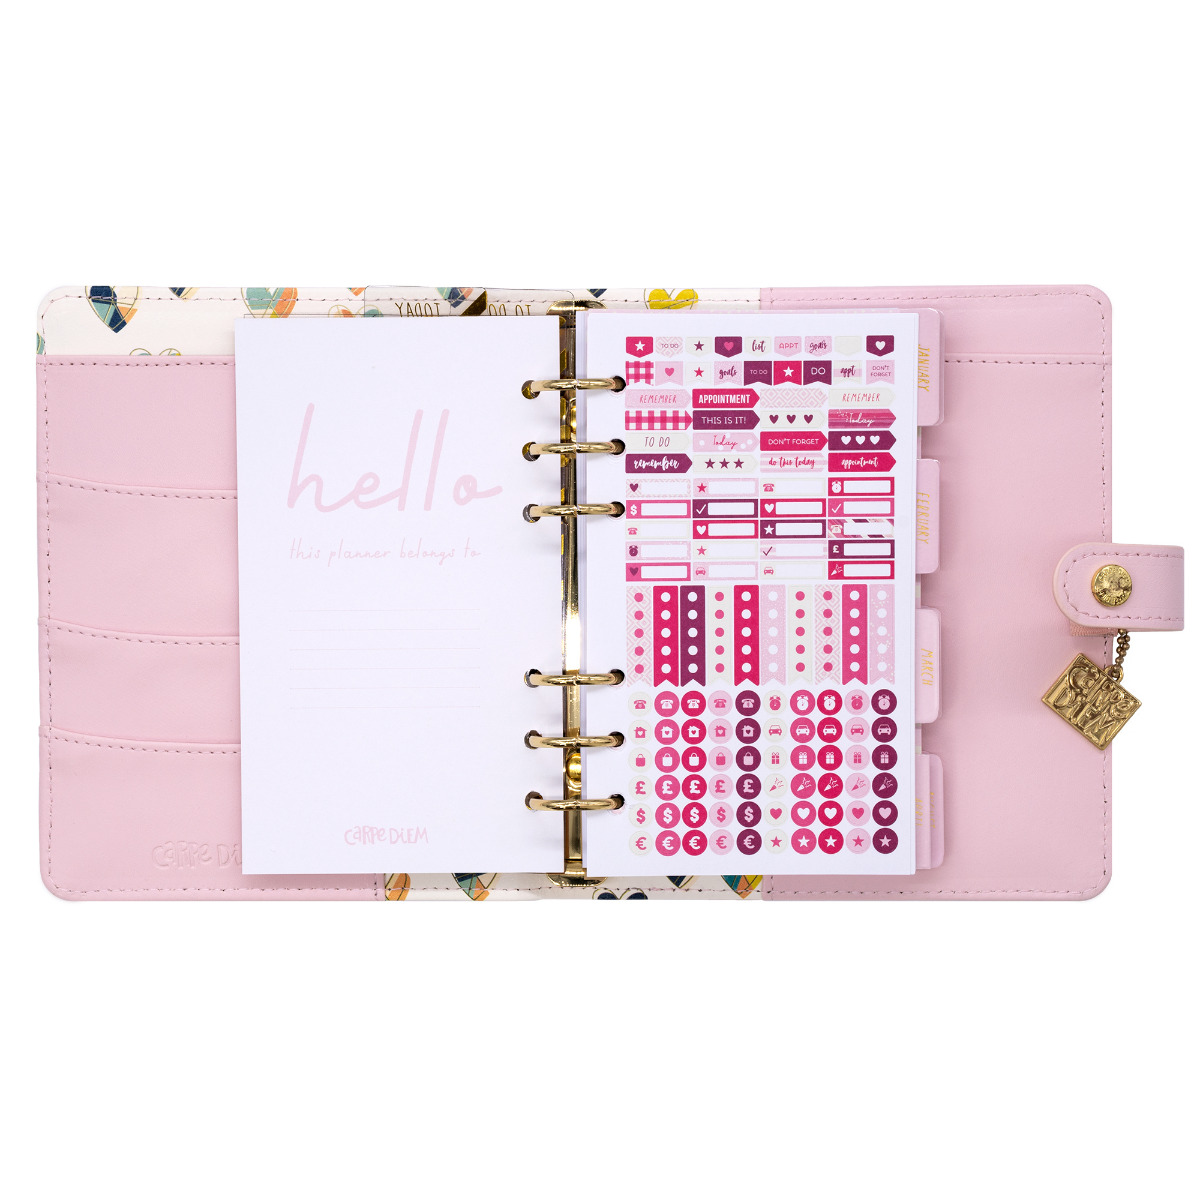 Pukka Pad, Carpe Diem Personal Planner with Weekly, Monthly Undated  Inserts, 8 X 7.5 X 1.4 Inches, Feathers